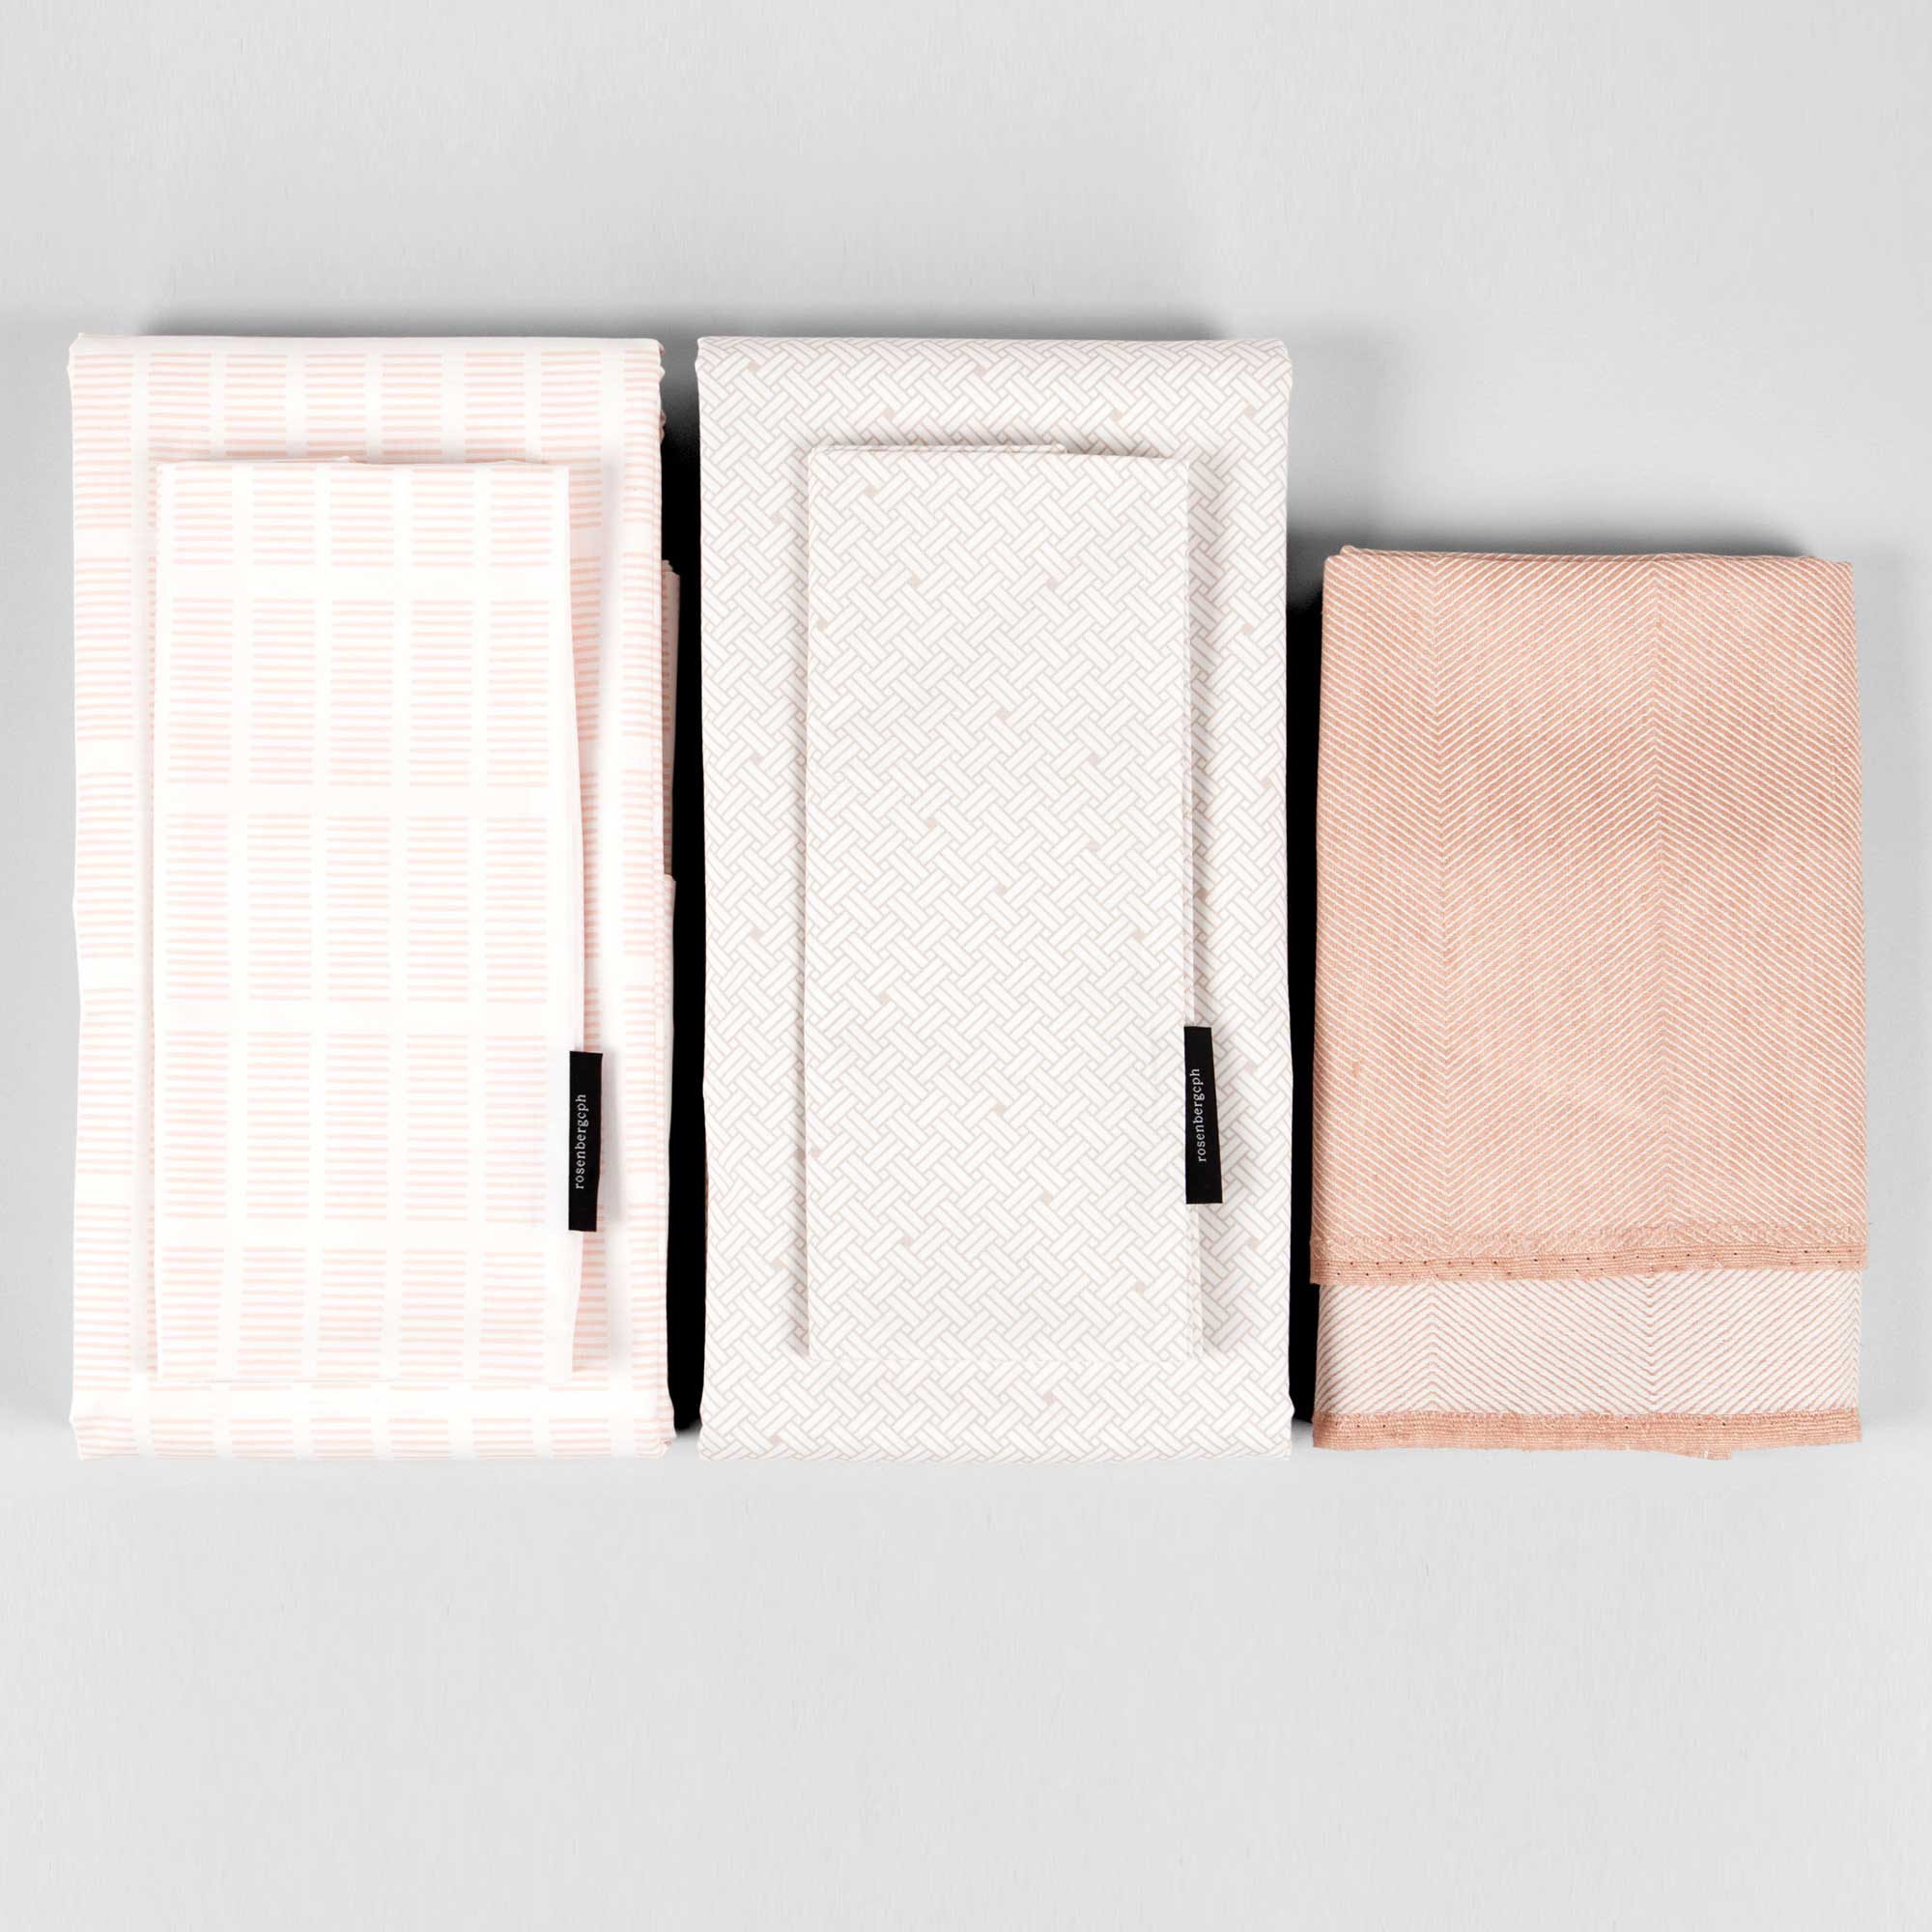 Tile and Weave bed linen, Coral bath towel